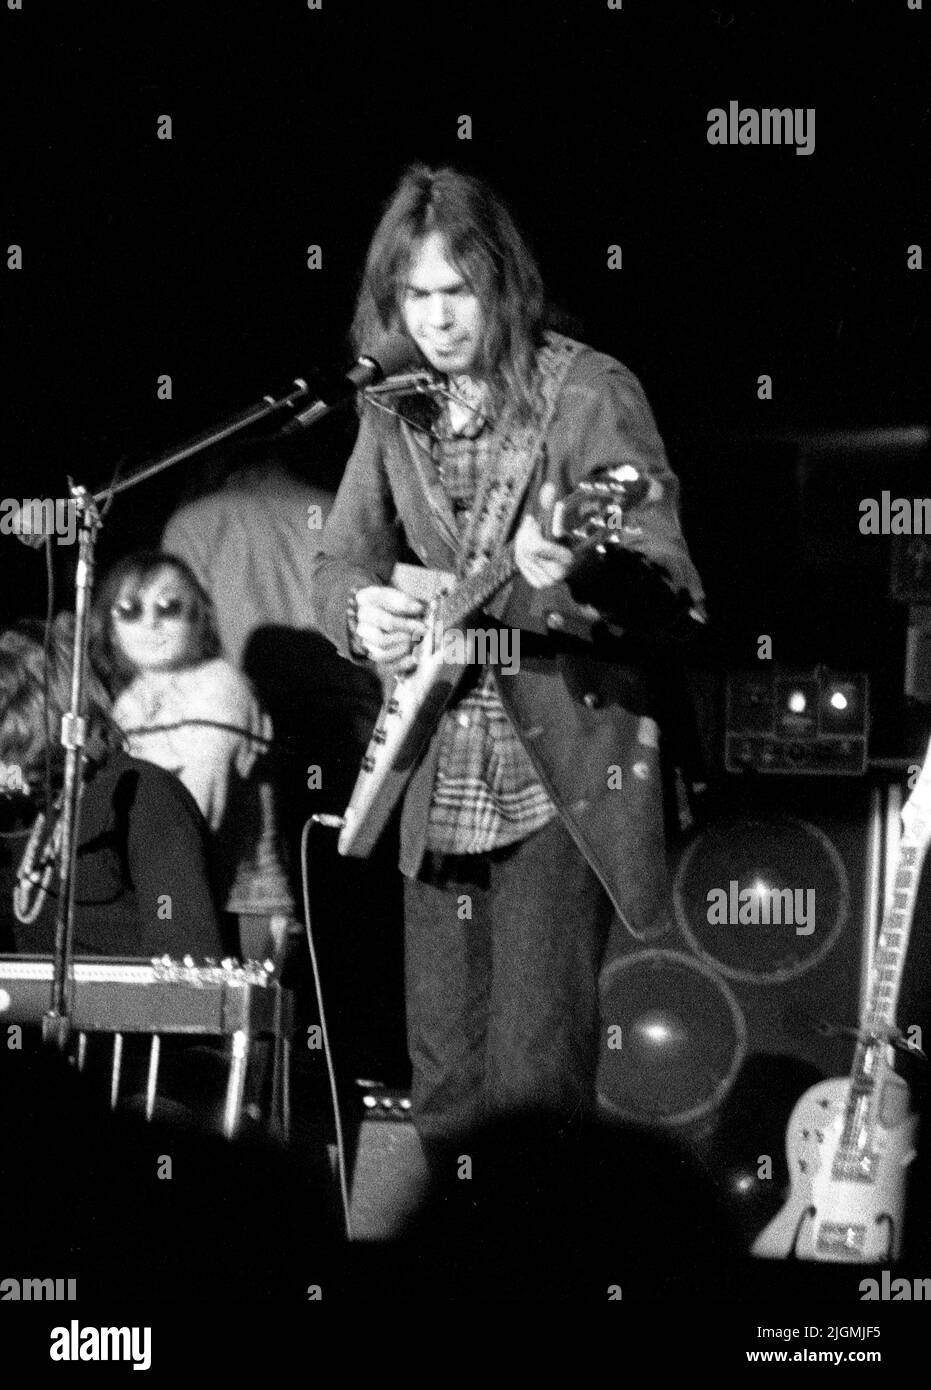 Neil Young at Fillmore West in San Francisco, CA, 1972 Stock Photo